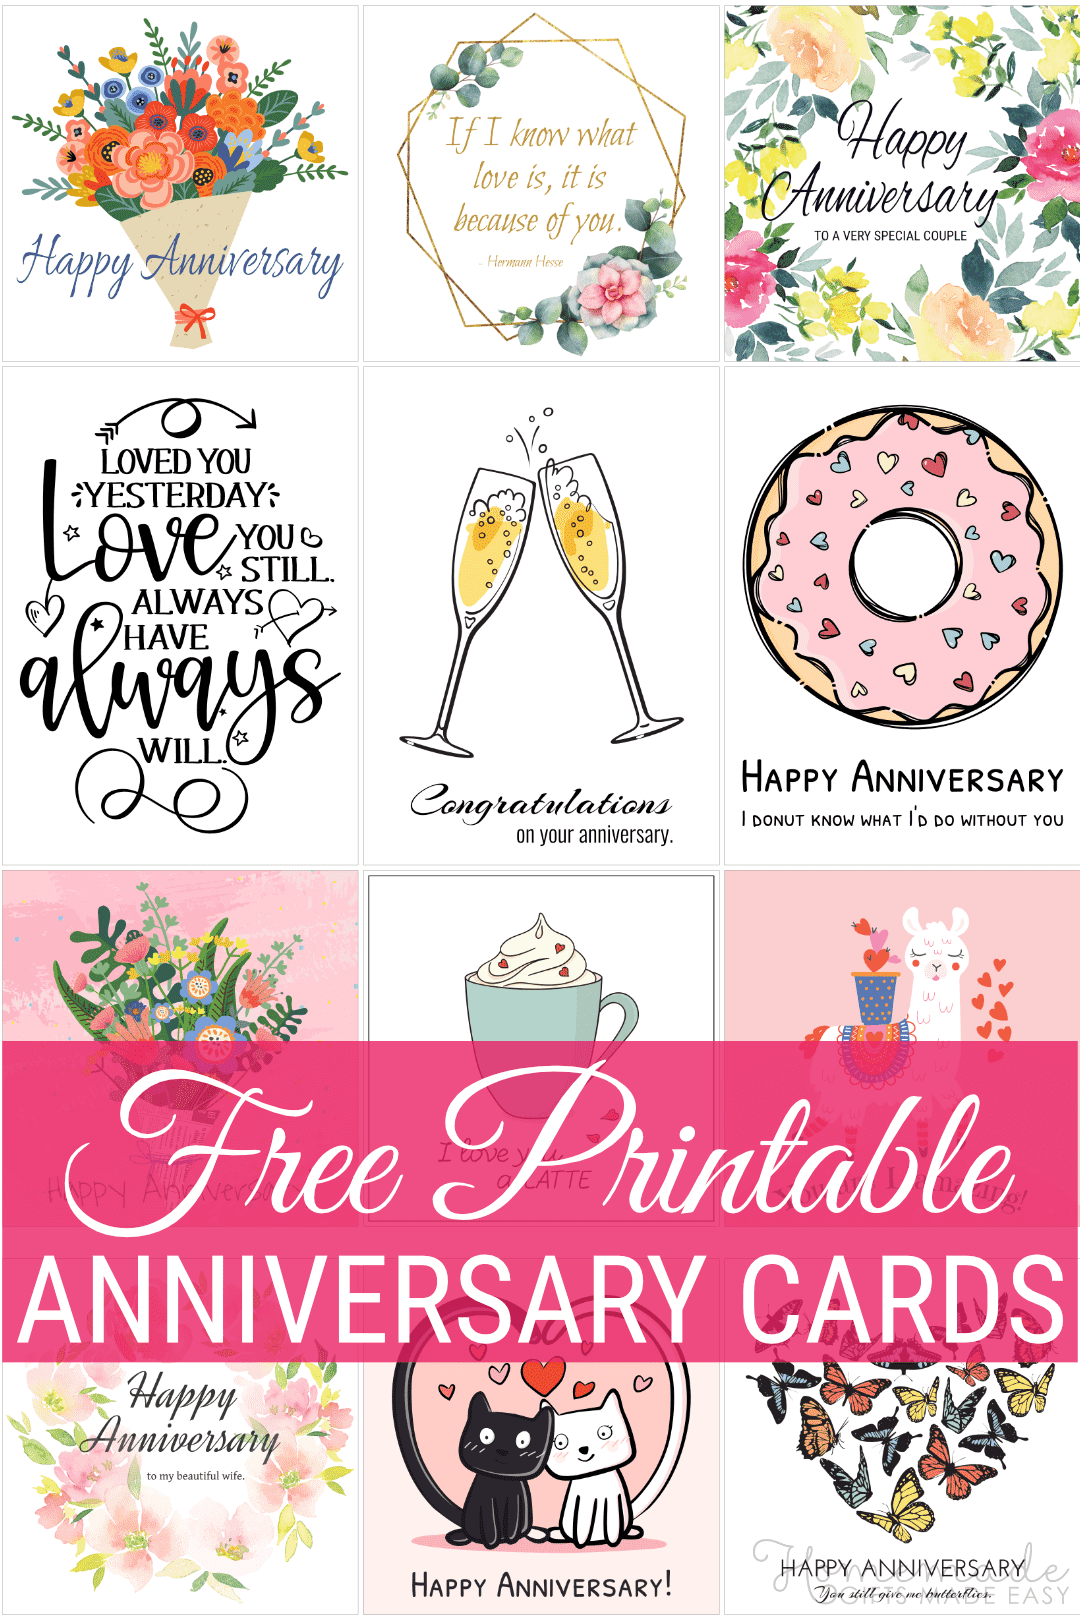 Free Printable Birthday Cards for Mom (3 Designs!) - Leap of Faith Crafting